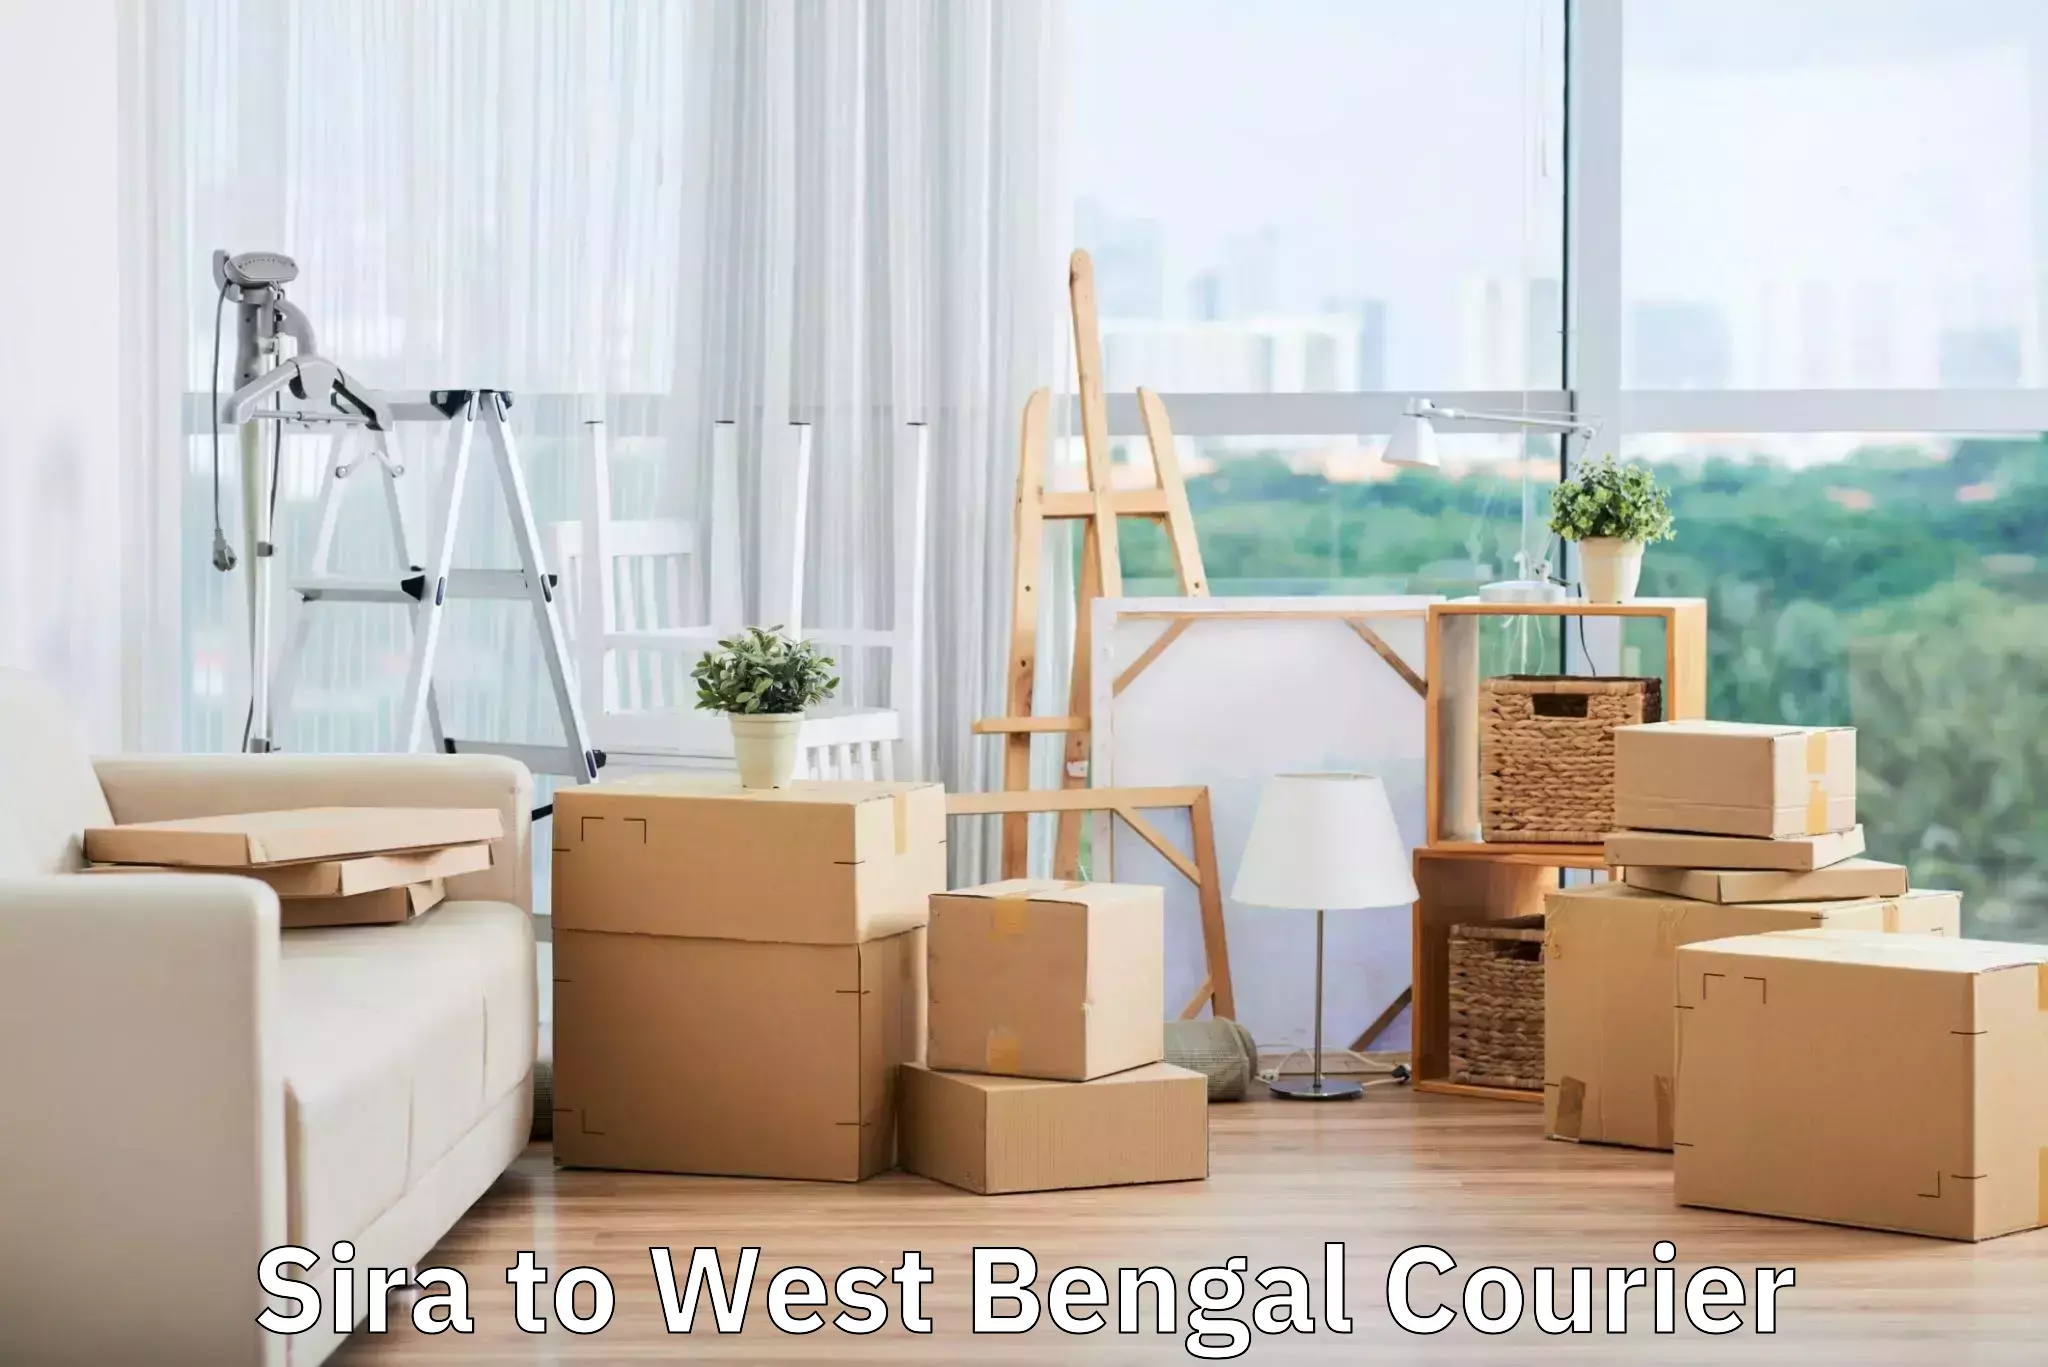 Luggage shipment tracking Sira to West Bengal